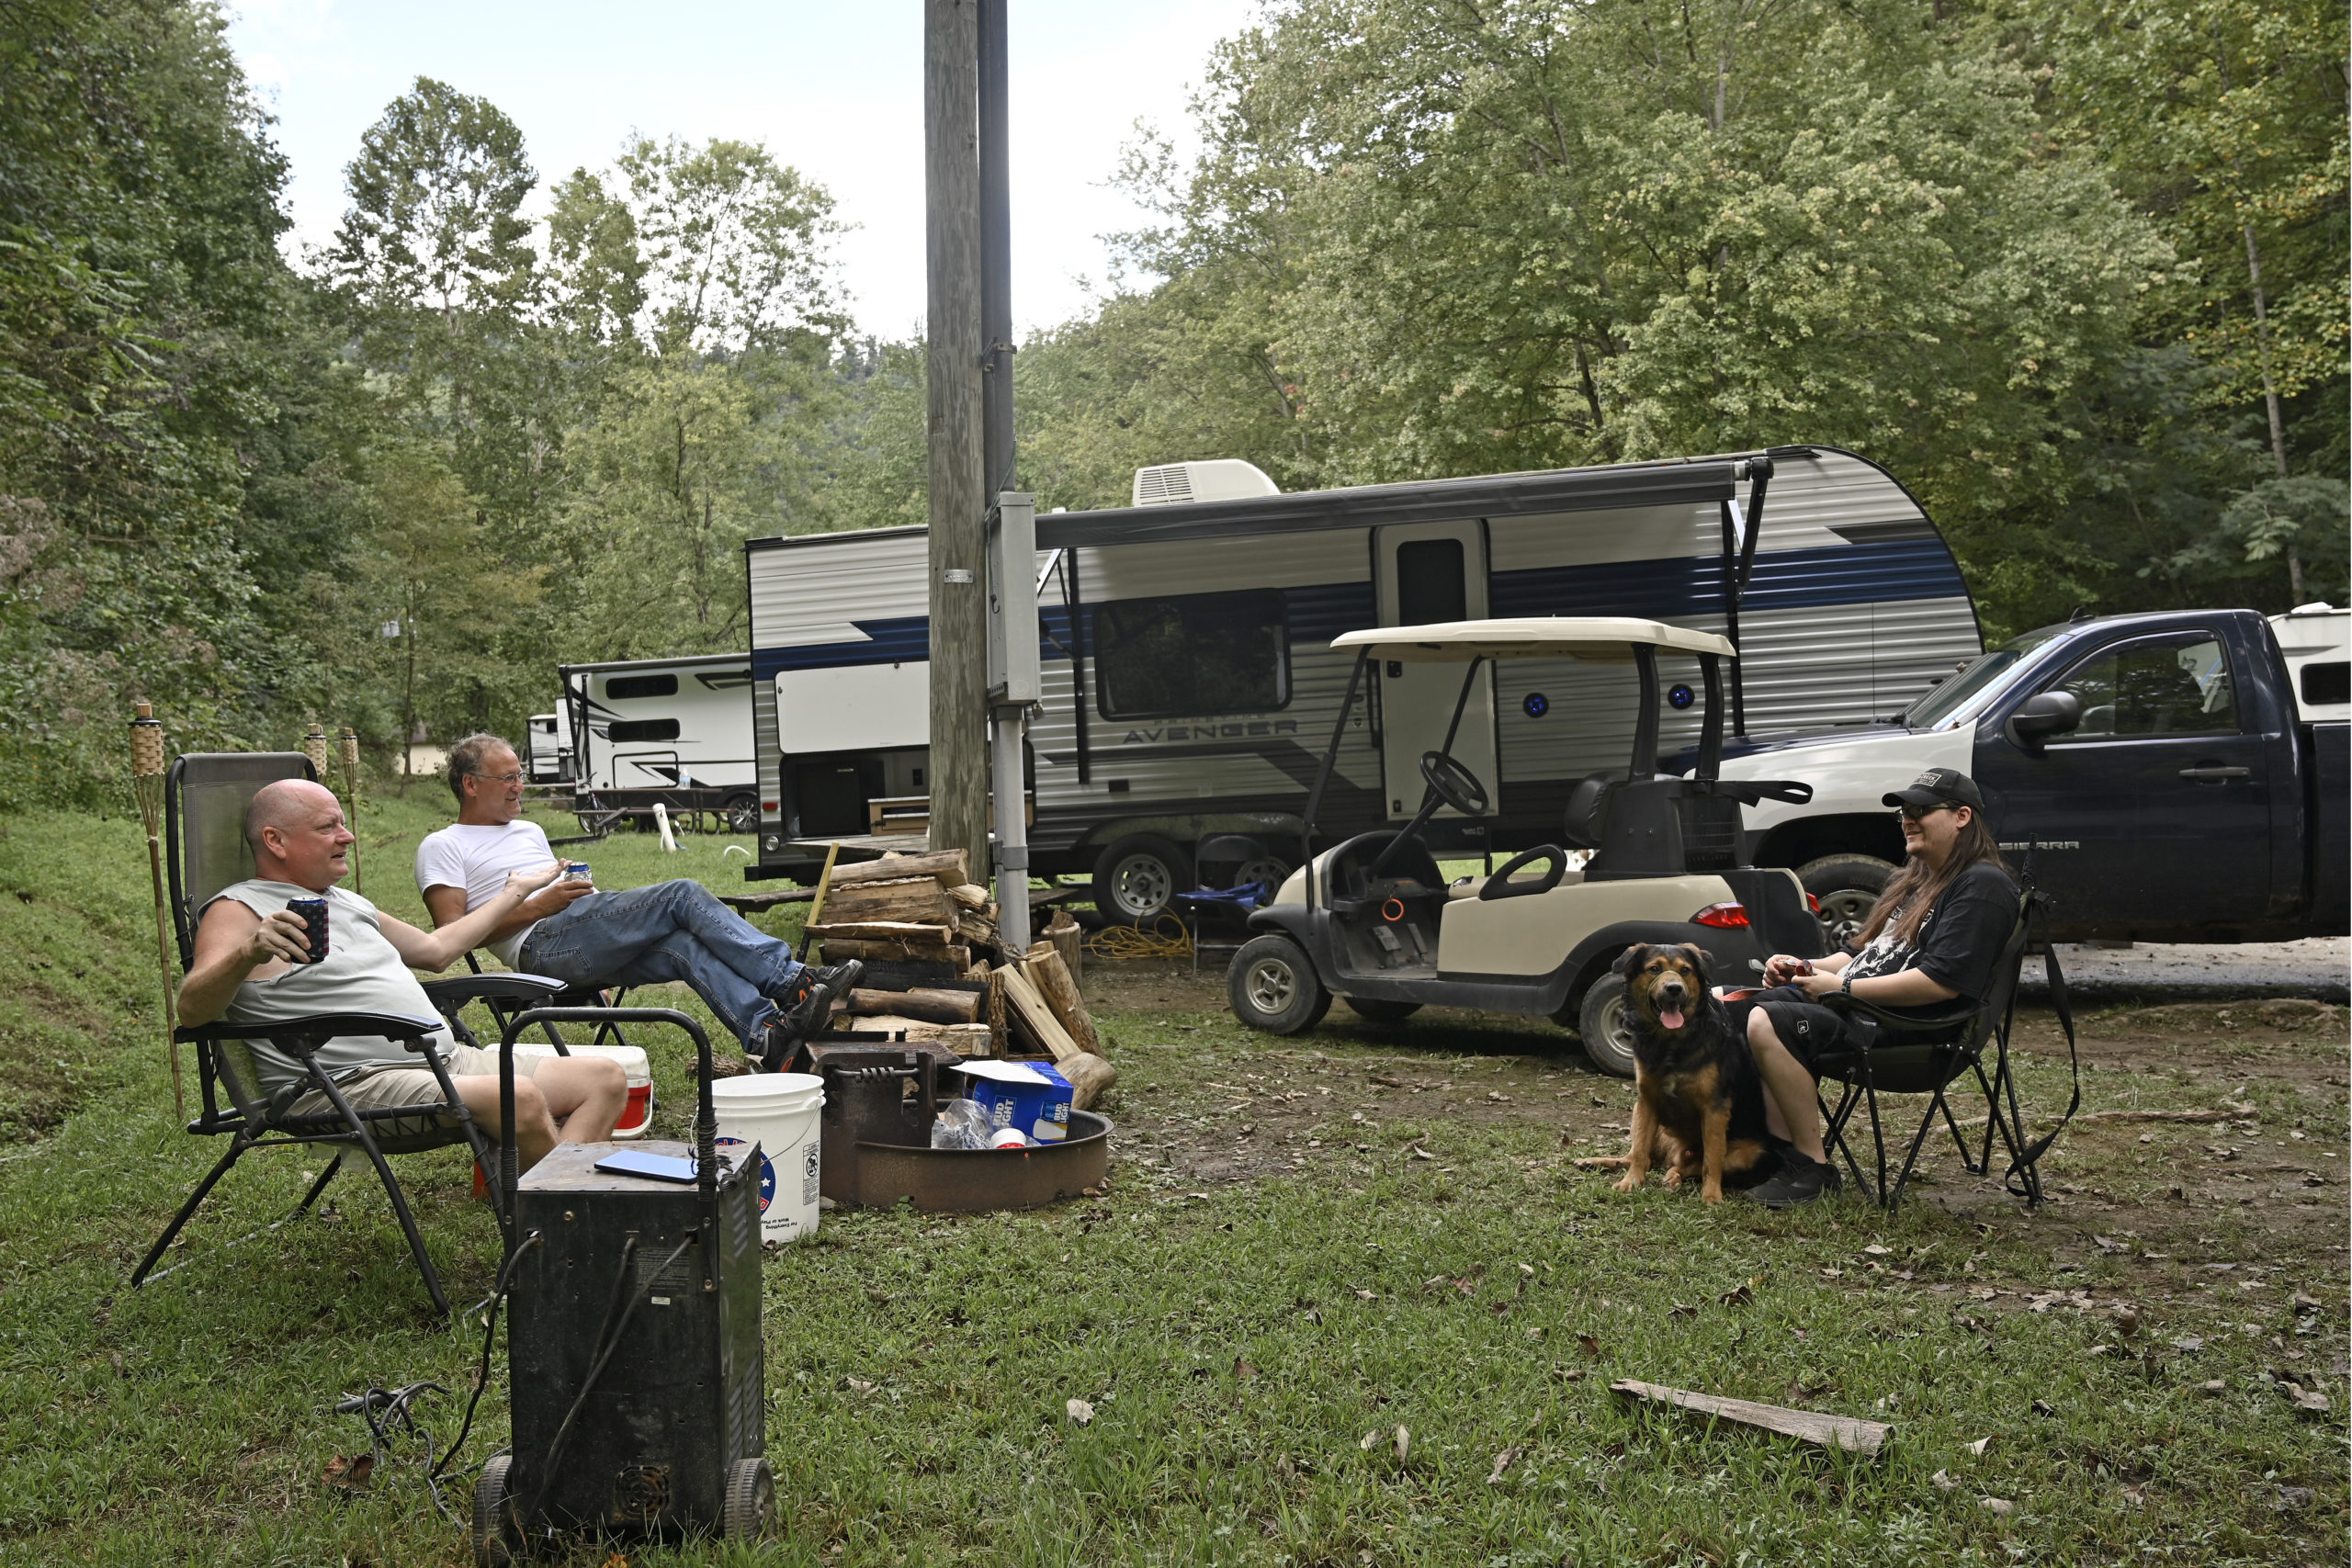 People displaced by floods in early July sit at their campsite at a state park in Prestonsburg, Kentucky, on Tuesday. The flood victims have been staying in travel trailers as they wait for workers to rebuild their homes.